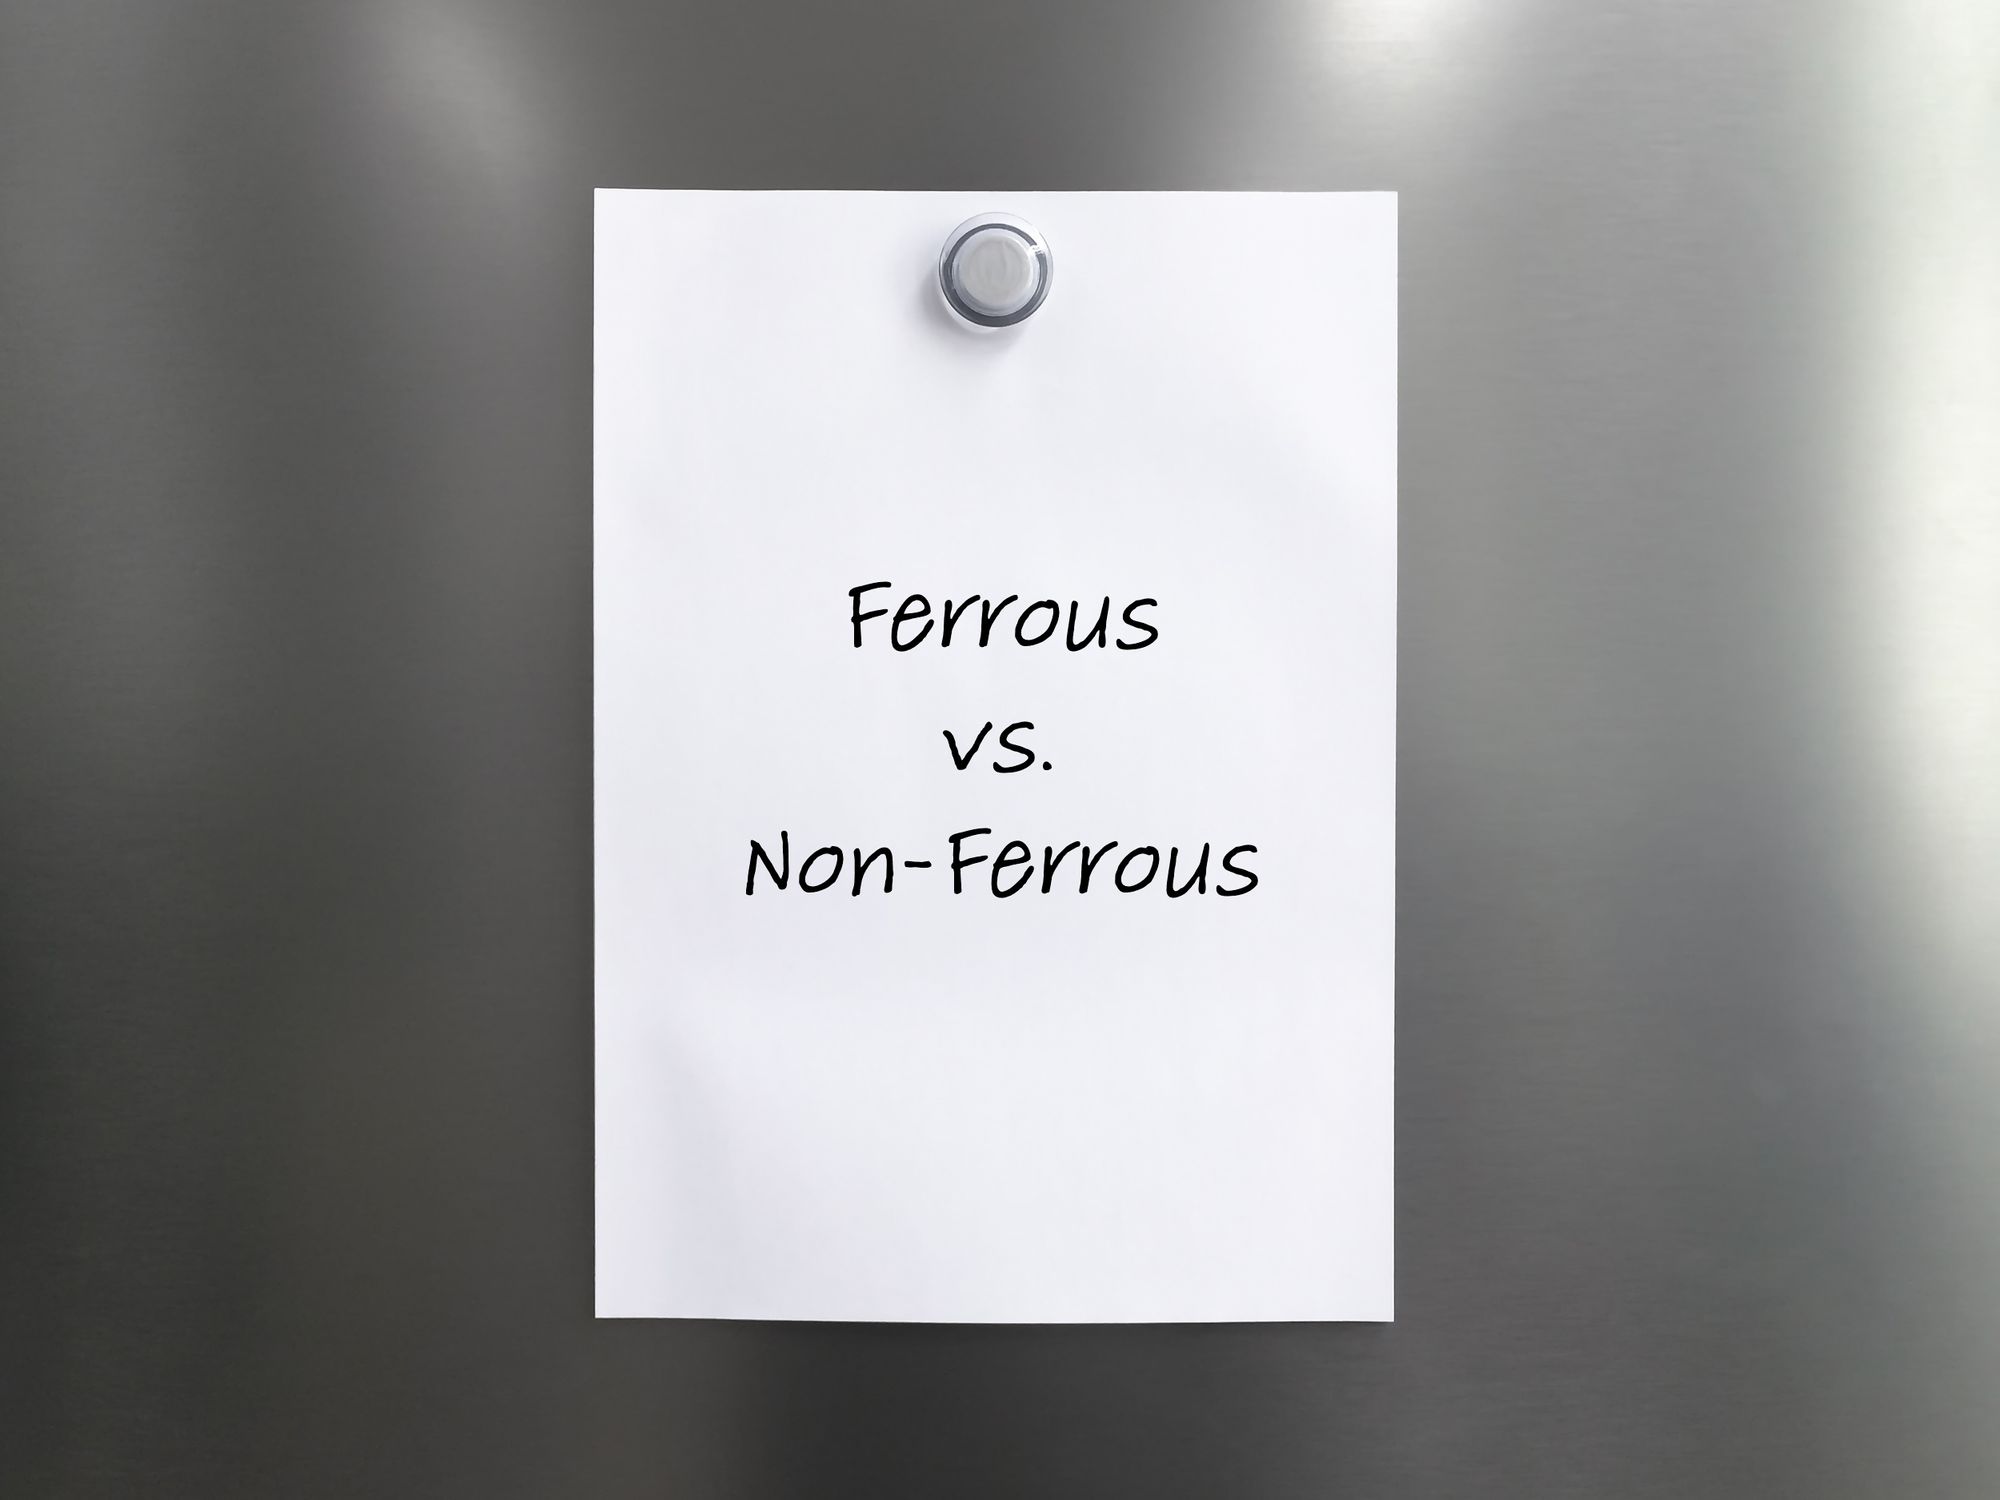 A piece of paper on a refrigerator door that says "Ferrous vs. Non-Ferrous".